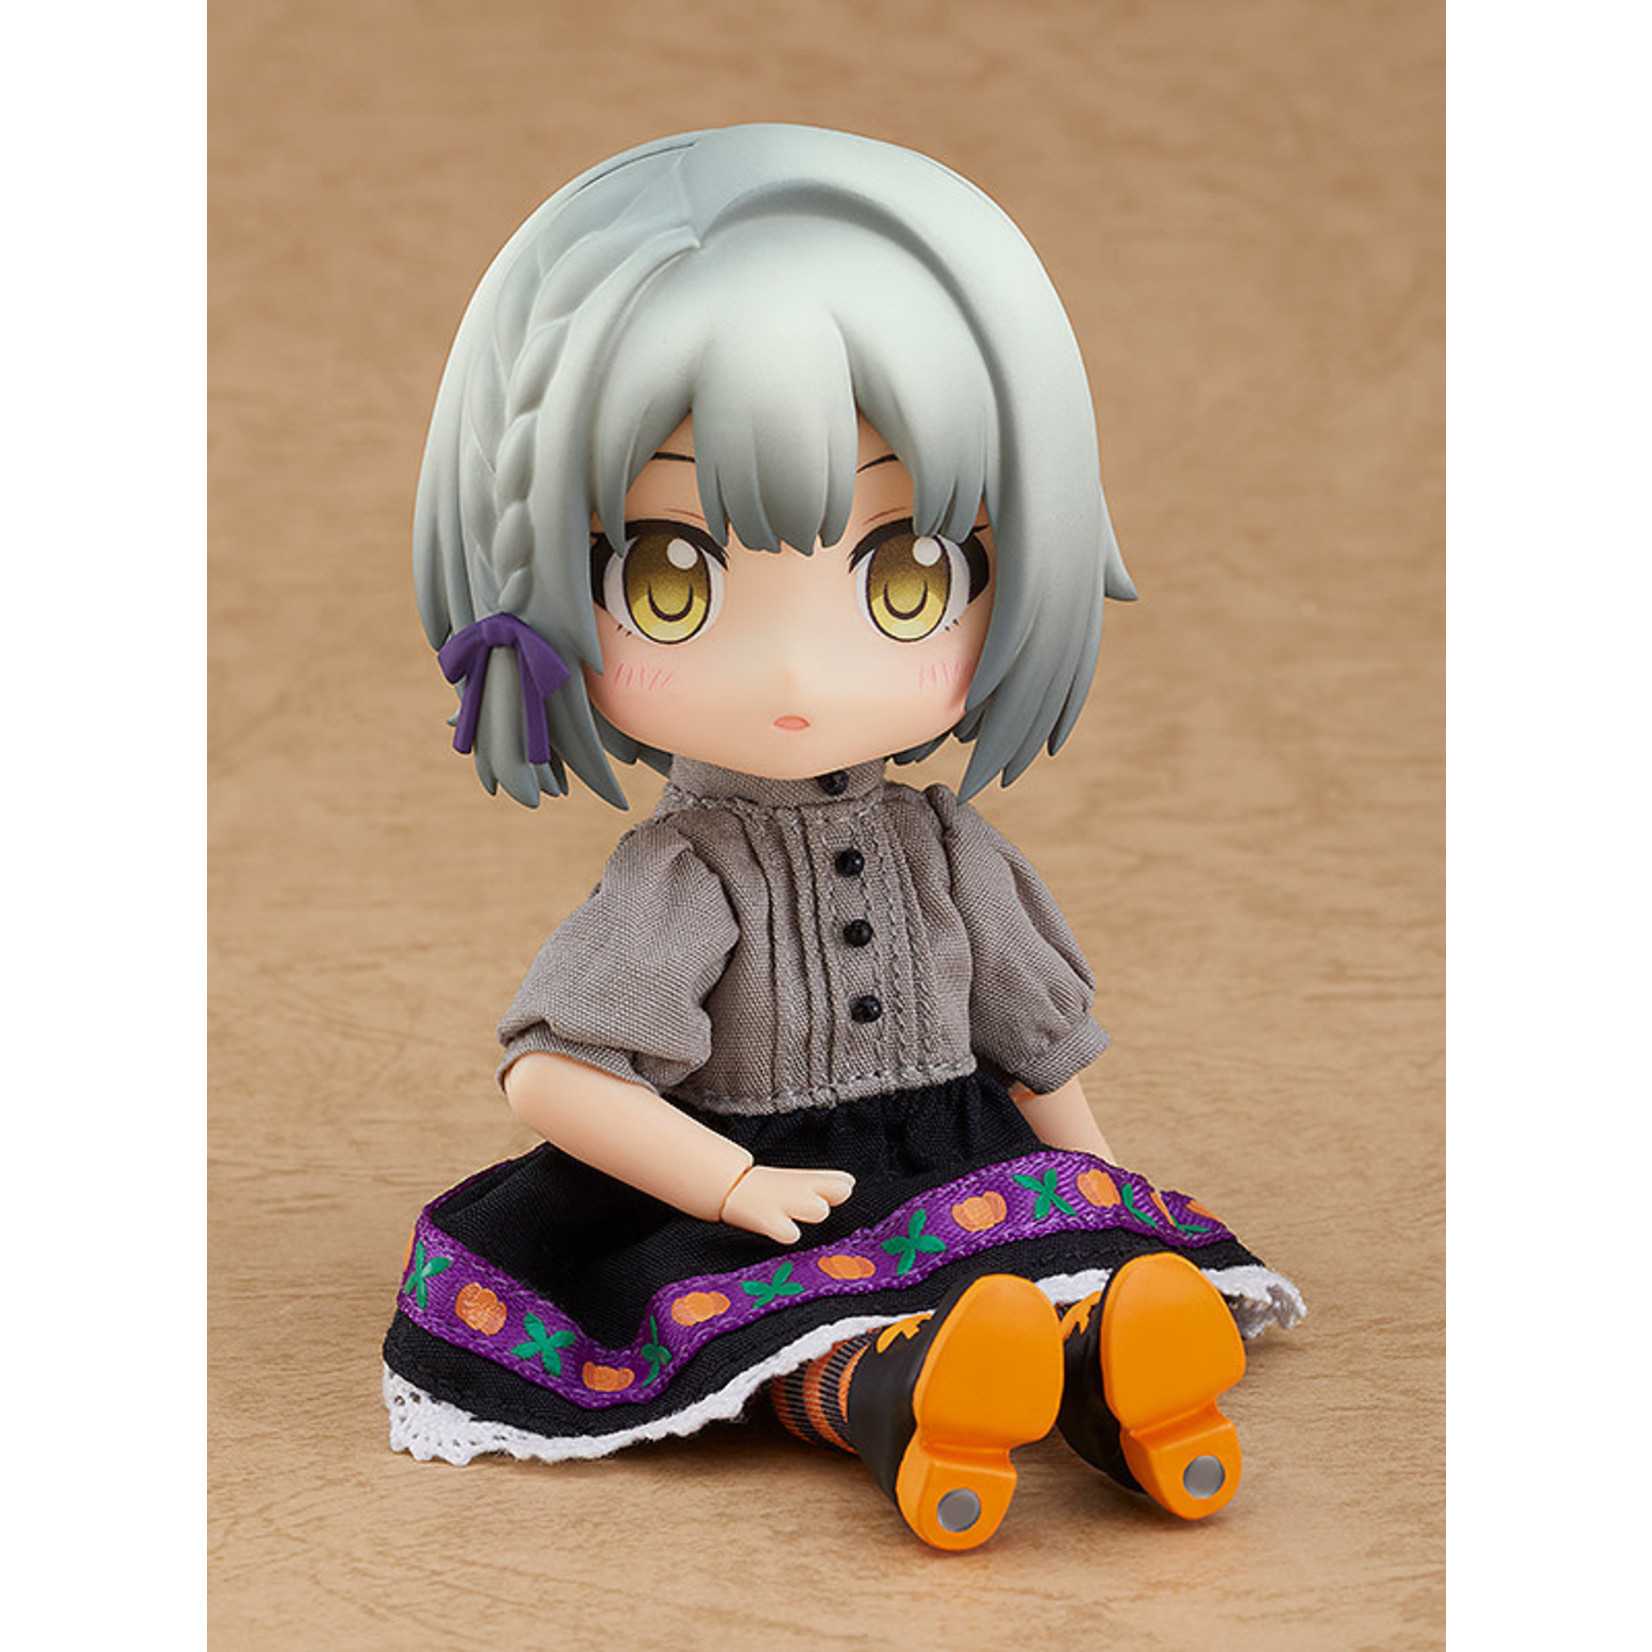 Original Character Rose Nendoroid Doll  Another Color